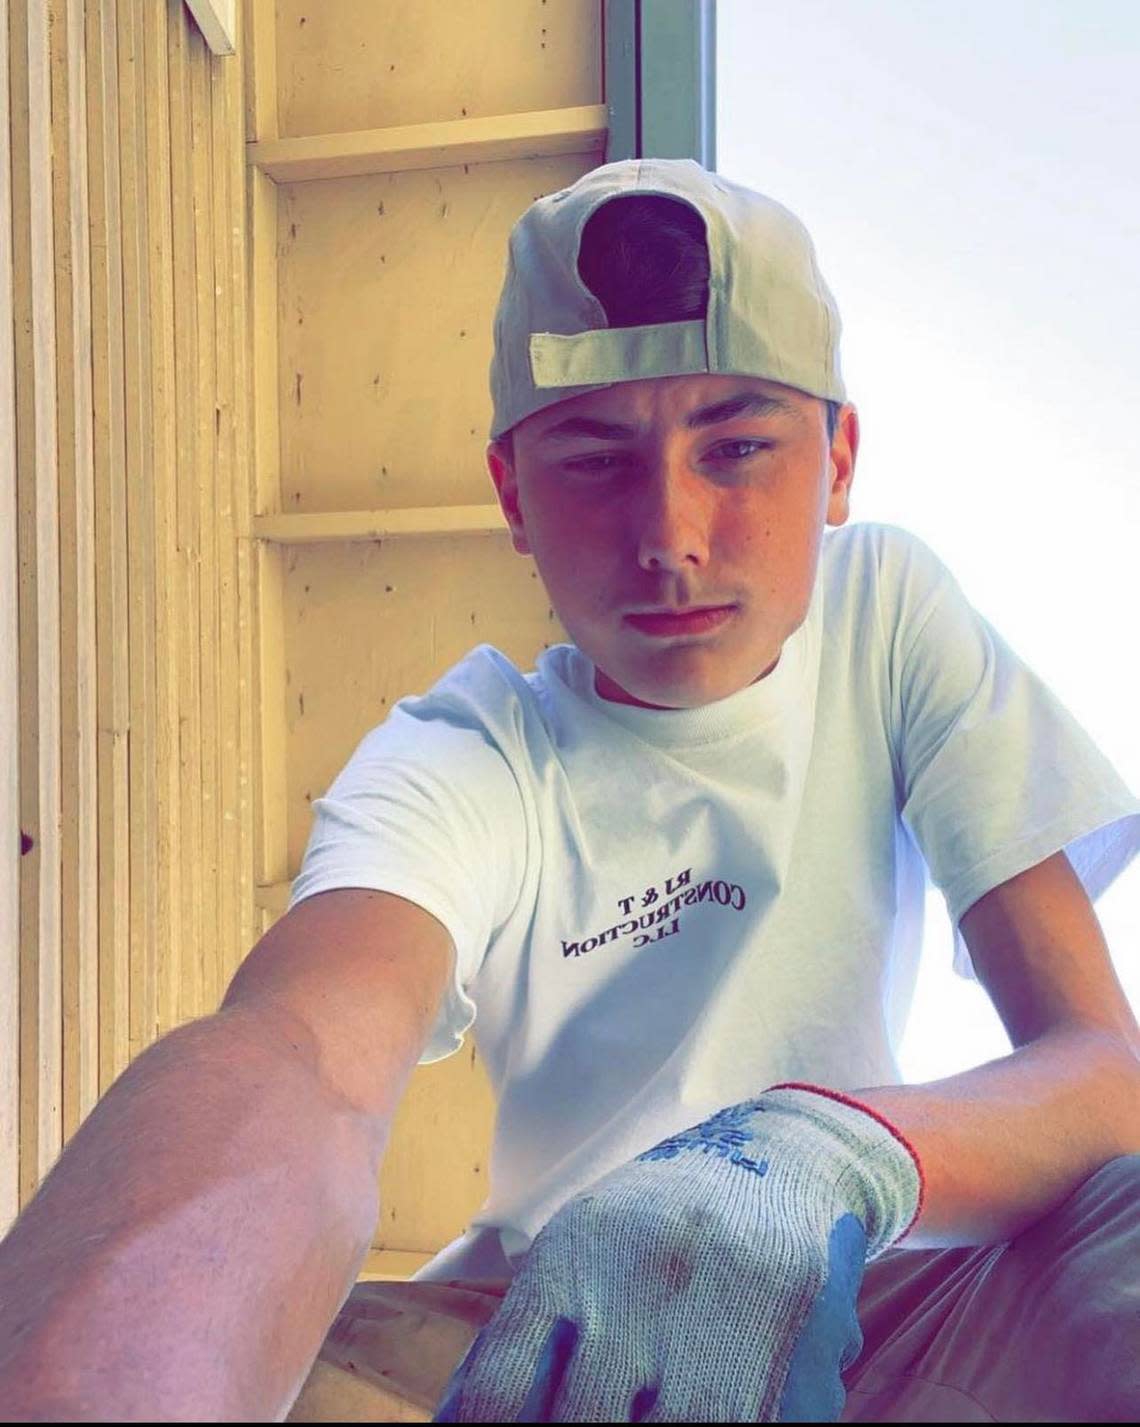 Alex Pulley, 19, was a passenger in a vehicle that wrecked last month on a rural Pierce County road east of Roy. Pulley was killed in the crash.